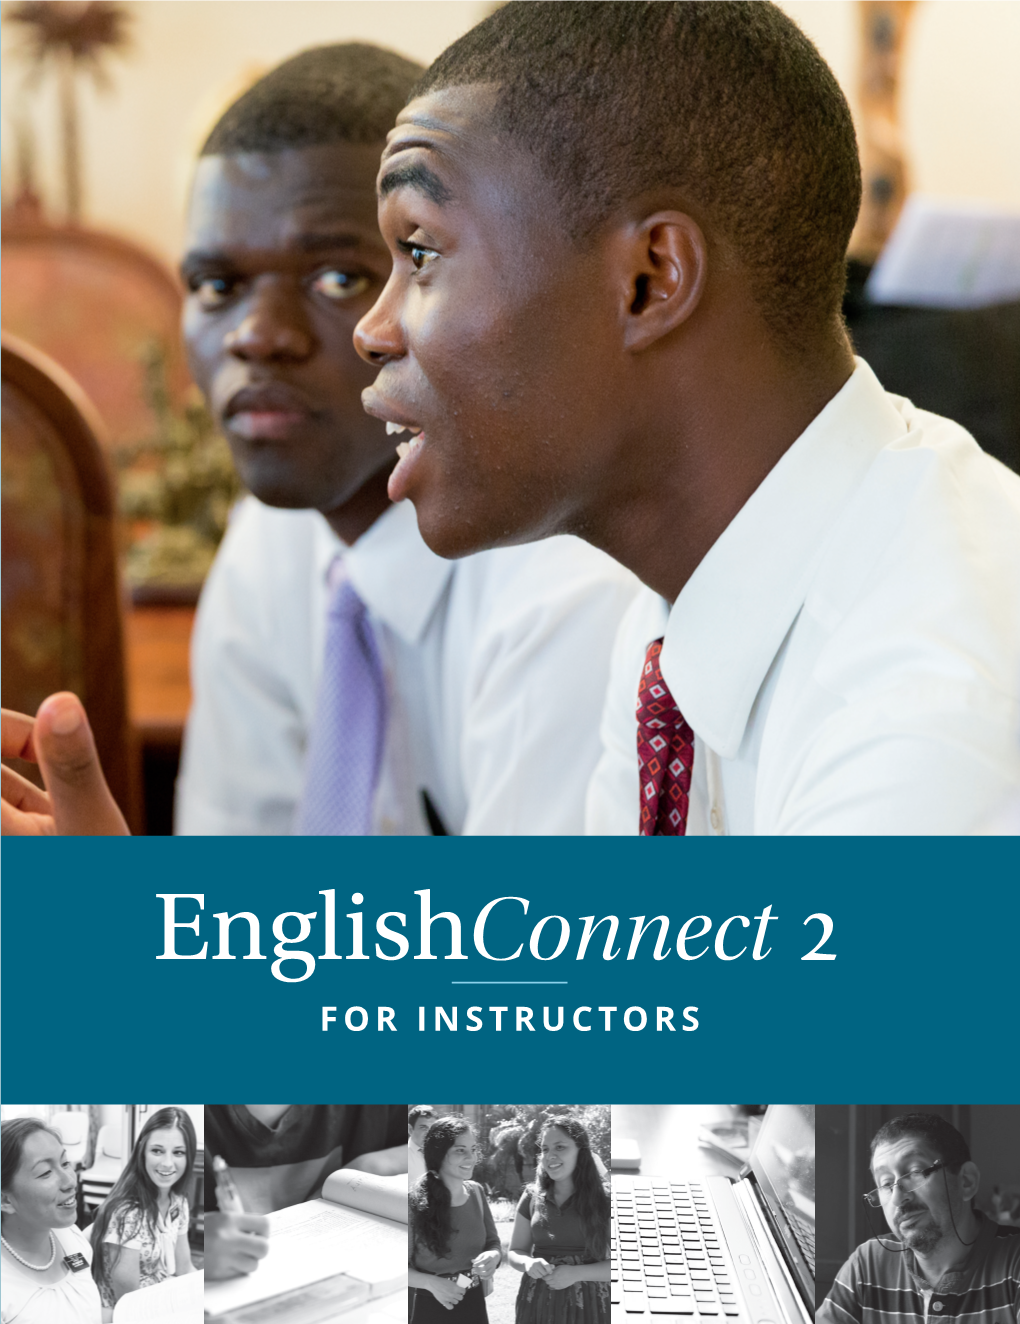 Englishconnect 2 for Instructors